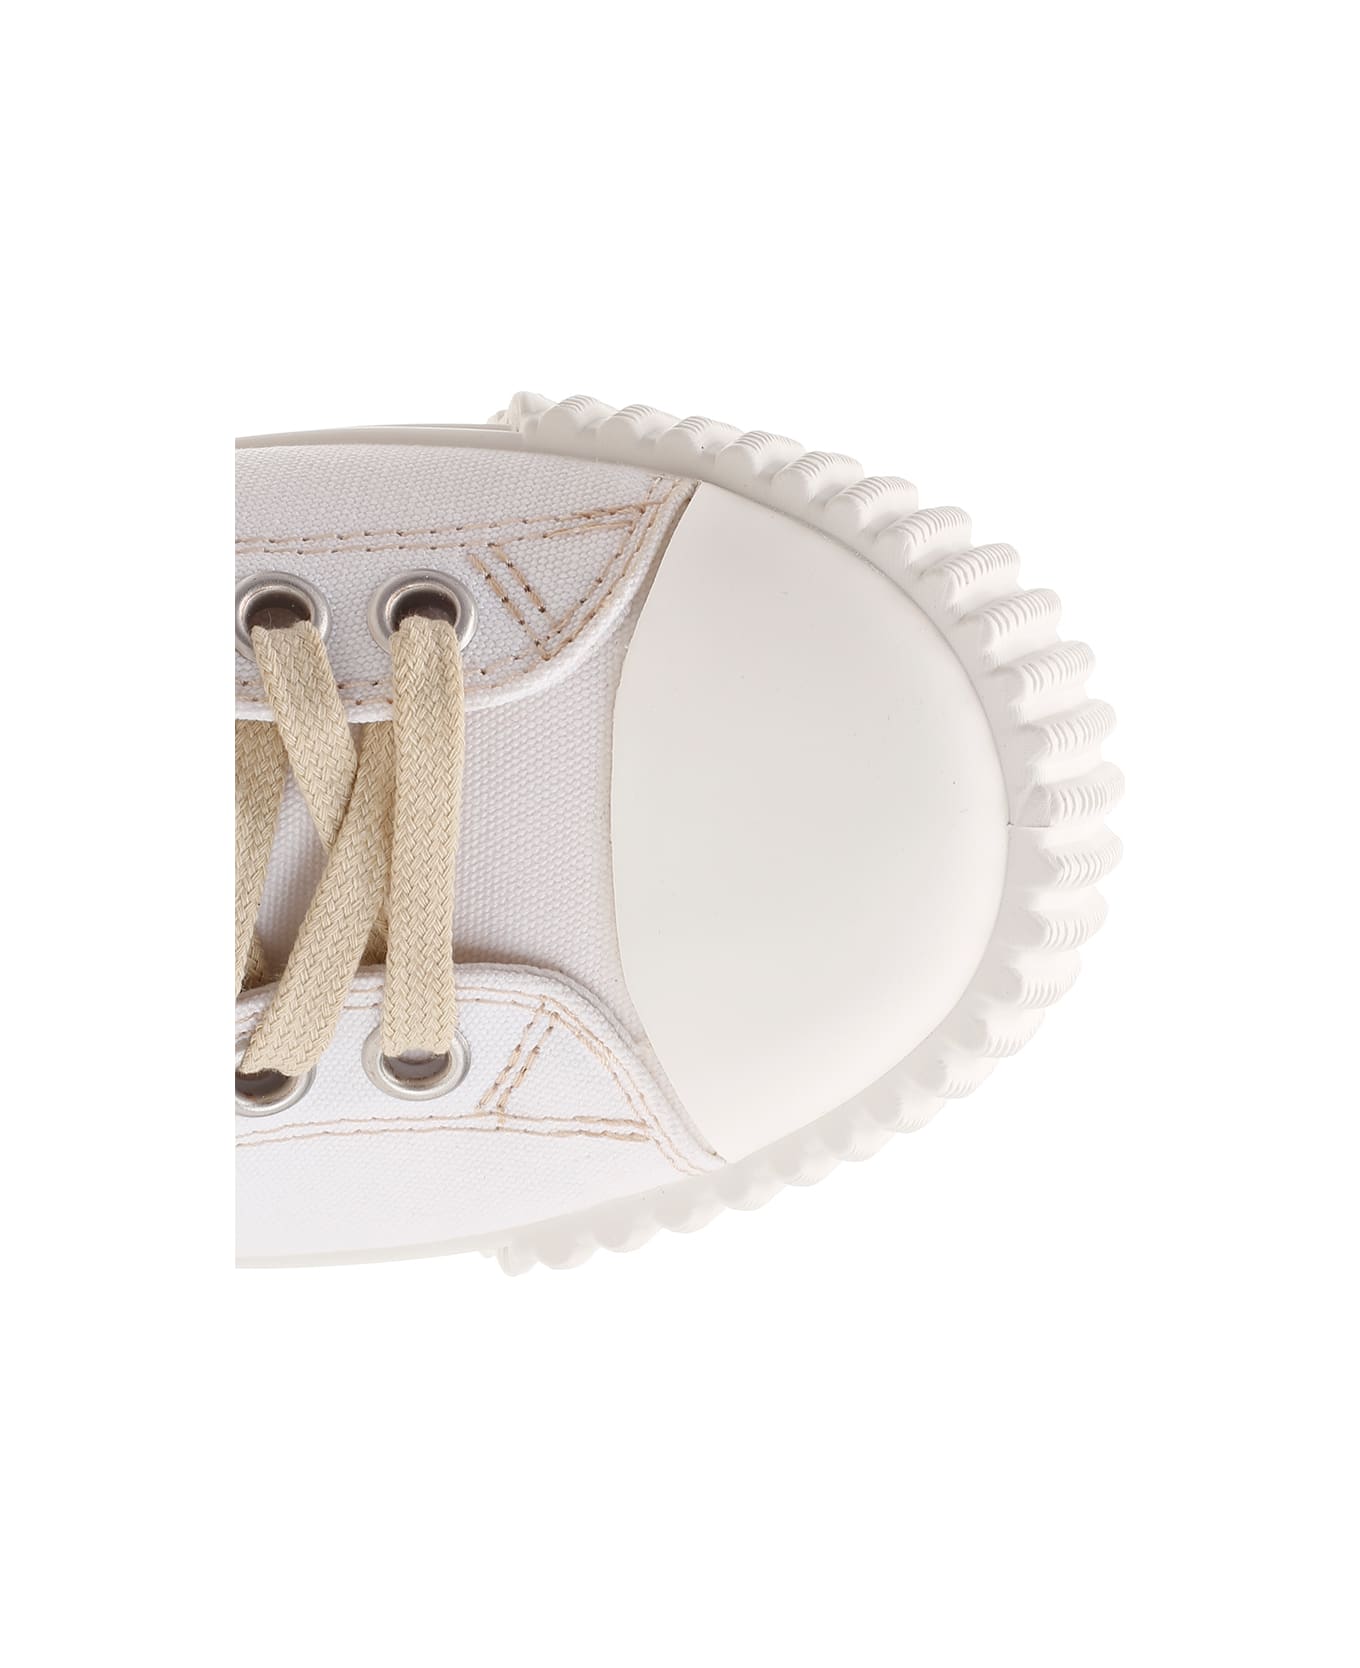 Maison Margiela Round-toe Lace-up Sneakers - White スニーカー